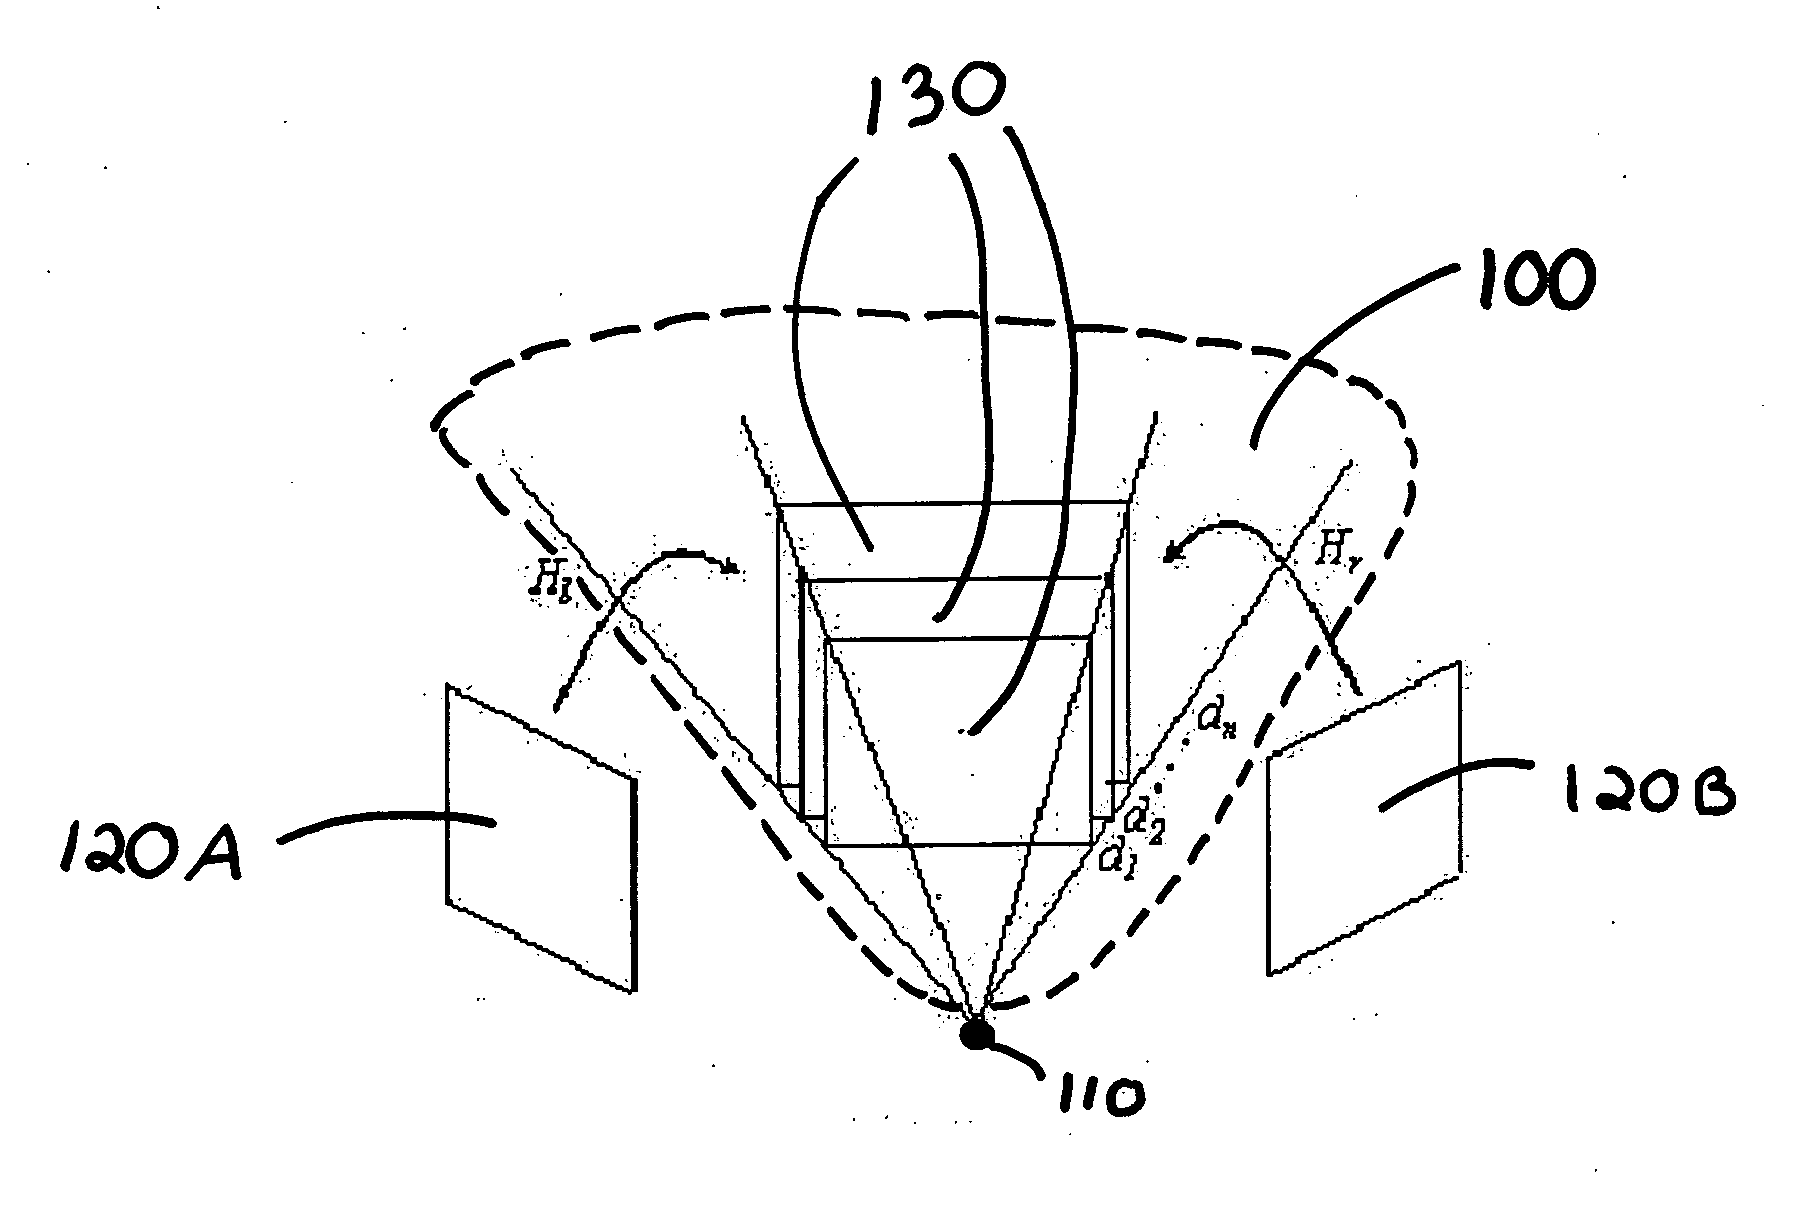 Systems and methods for directly generating a view using a layered approach